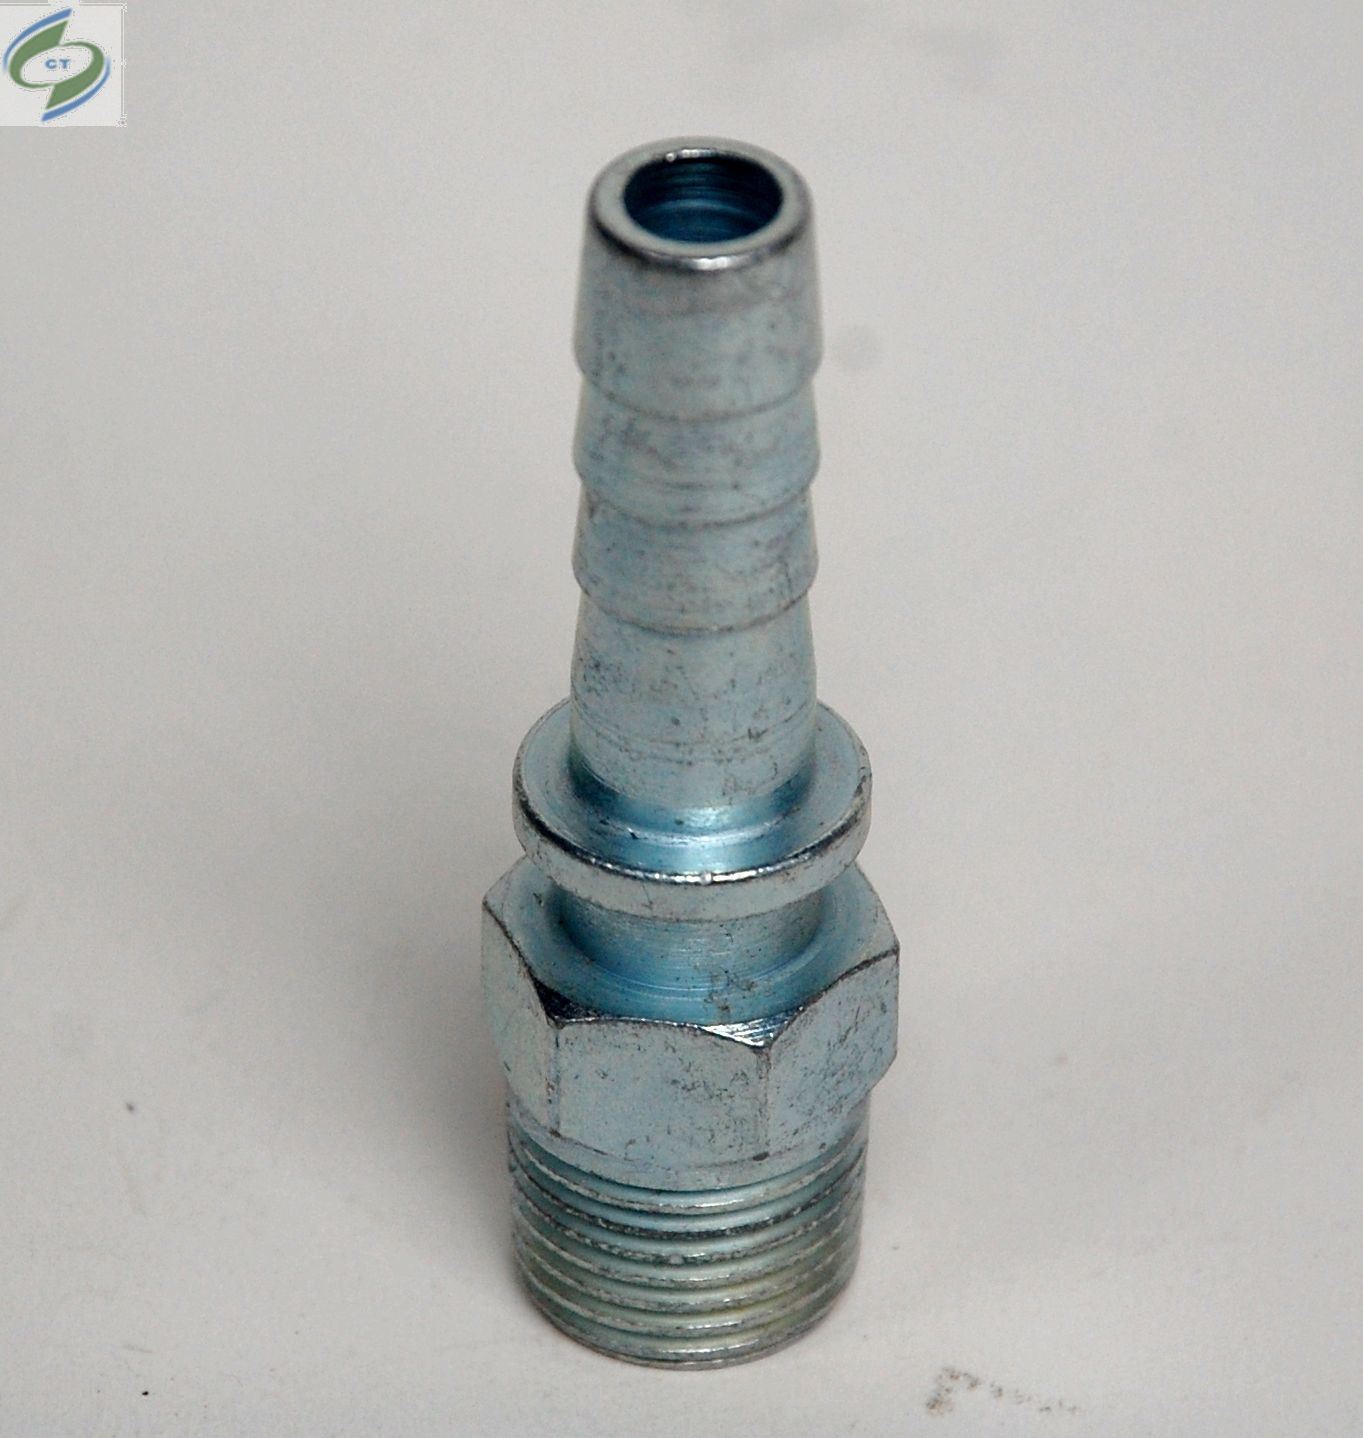 Ground Joint Coupling